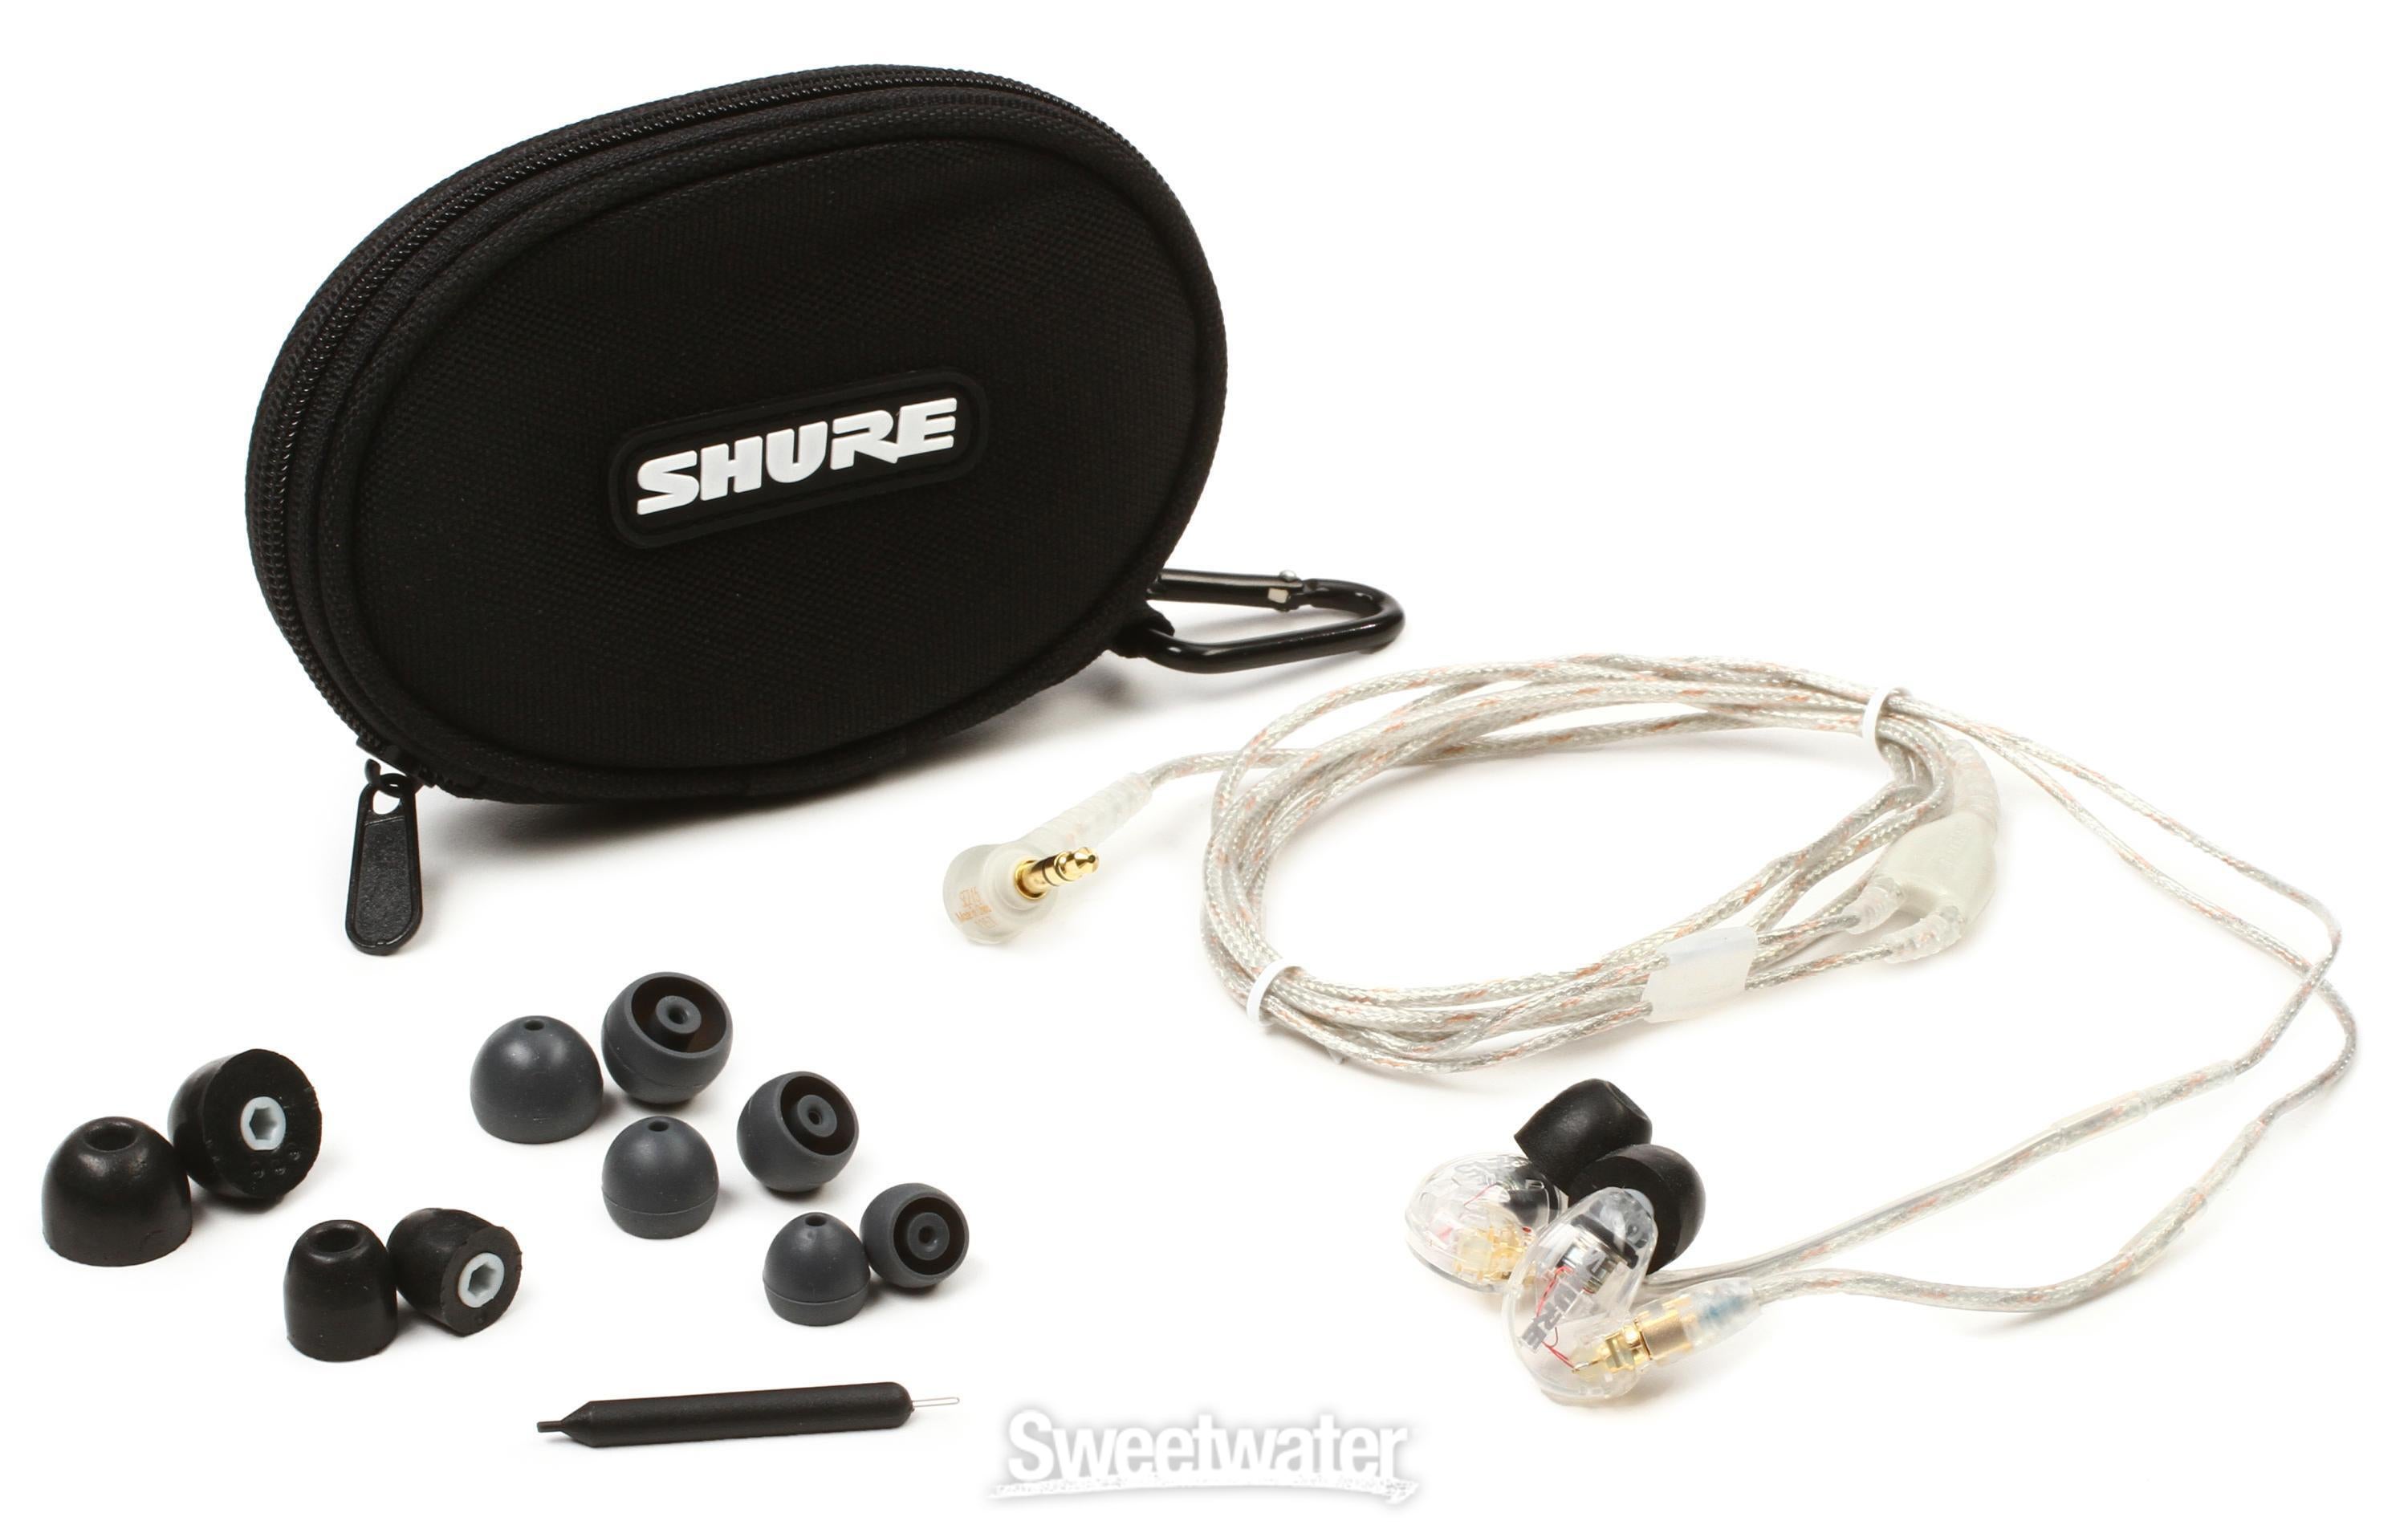 Shure SE215-CL Sound Isolating Earphones - Clear | Sweetwater